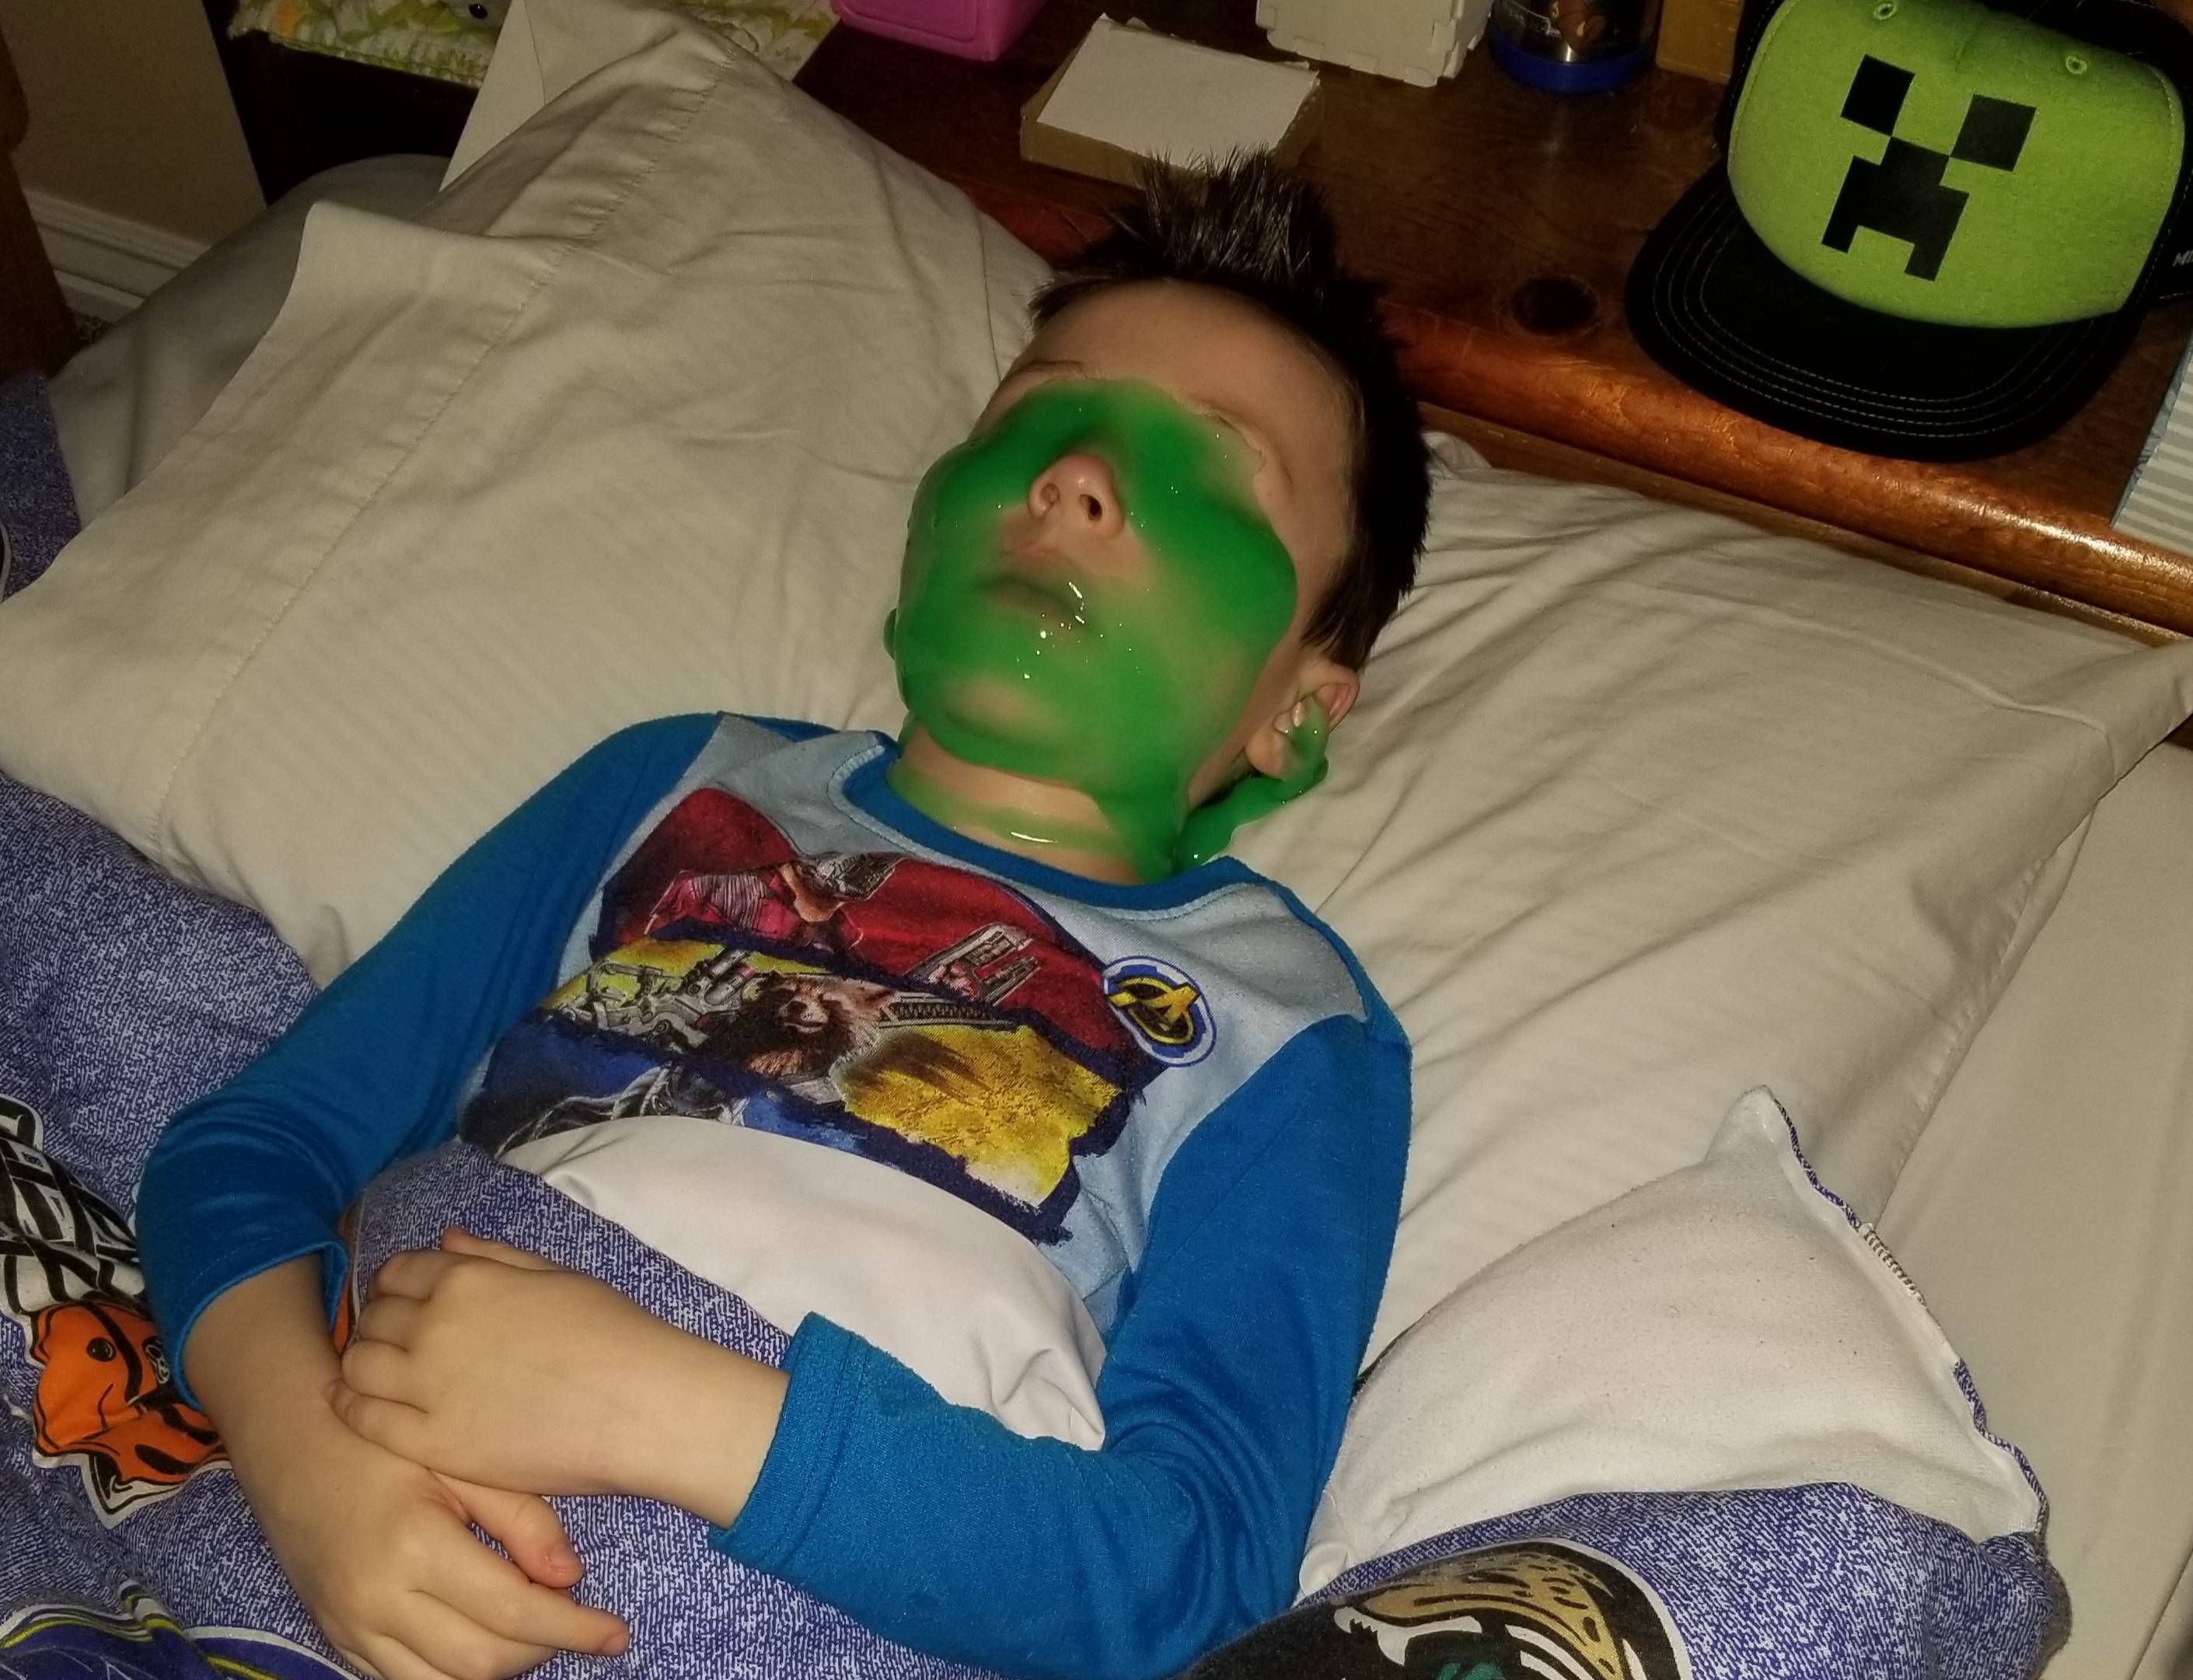 Wife and I went out one night and came home to my son sleeping like this.